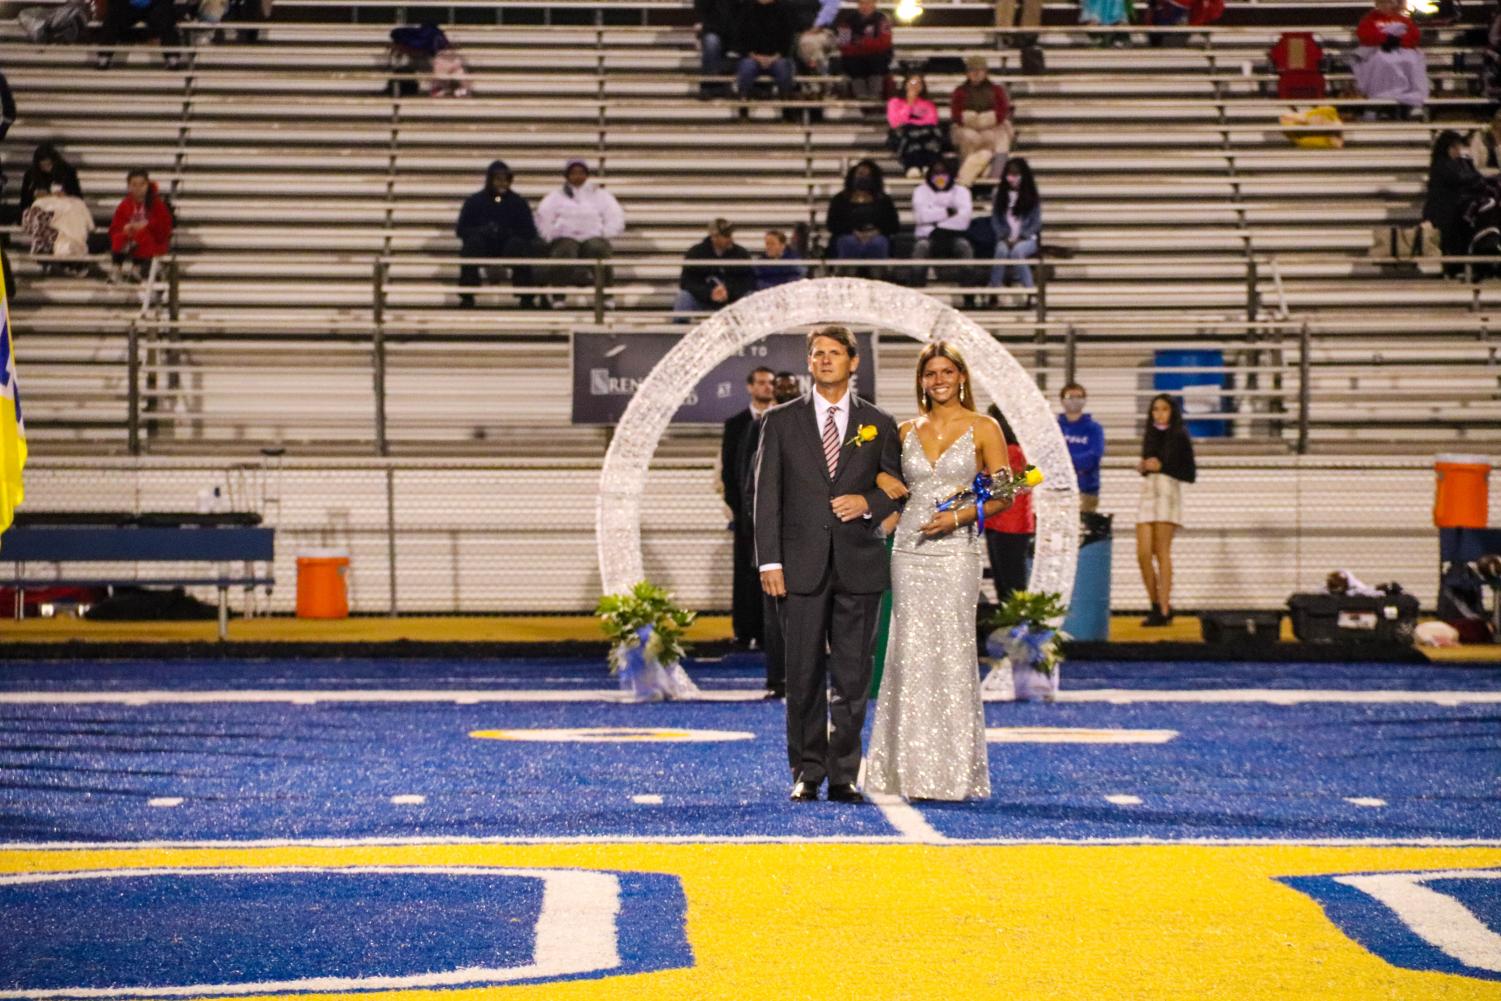 Halle+Traylor+named+2020+Homecoming+Queen